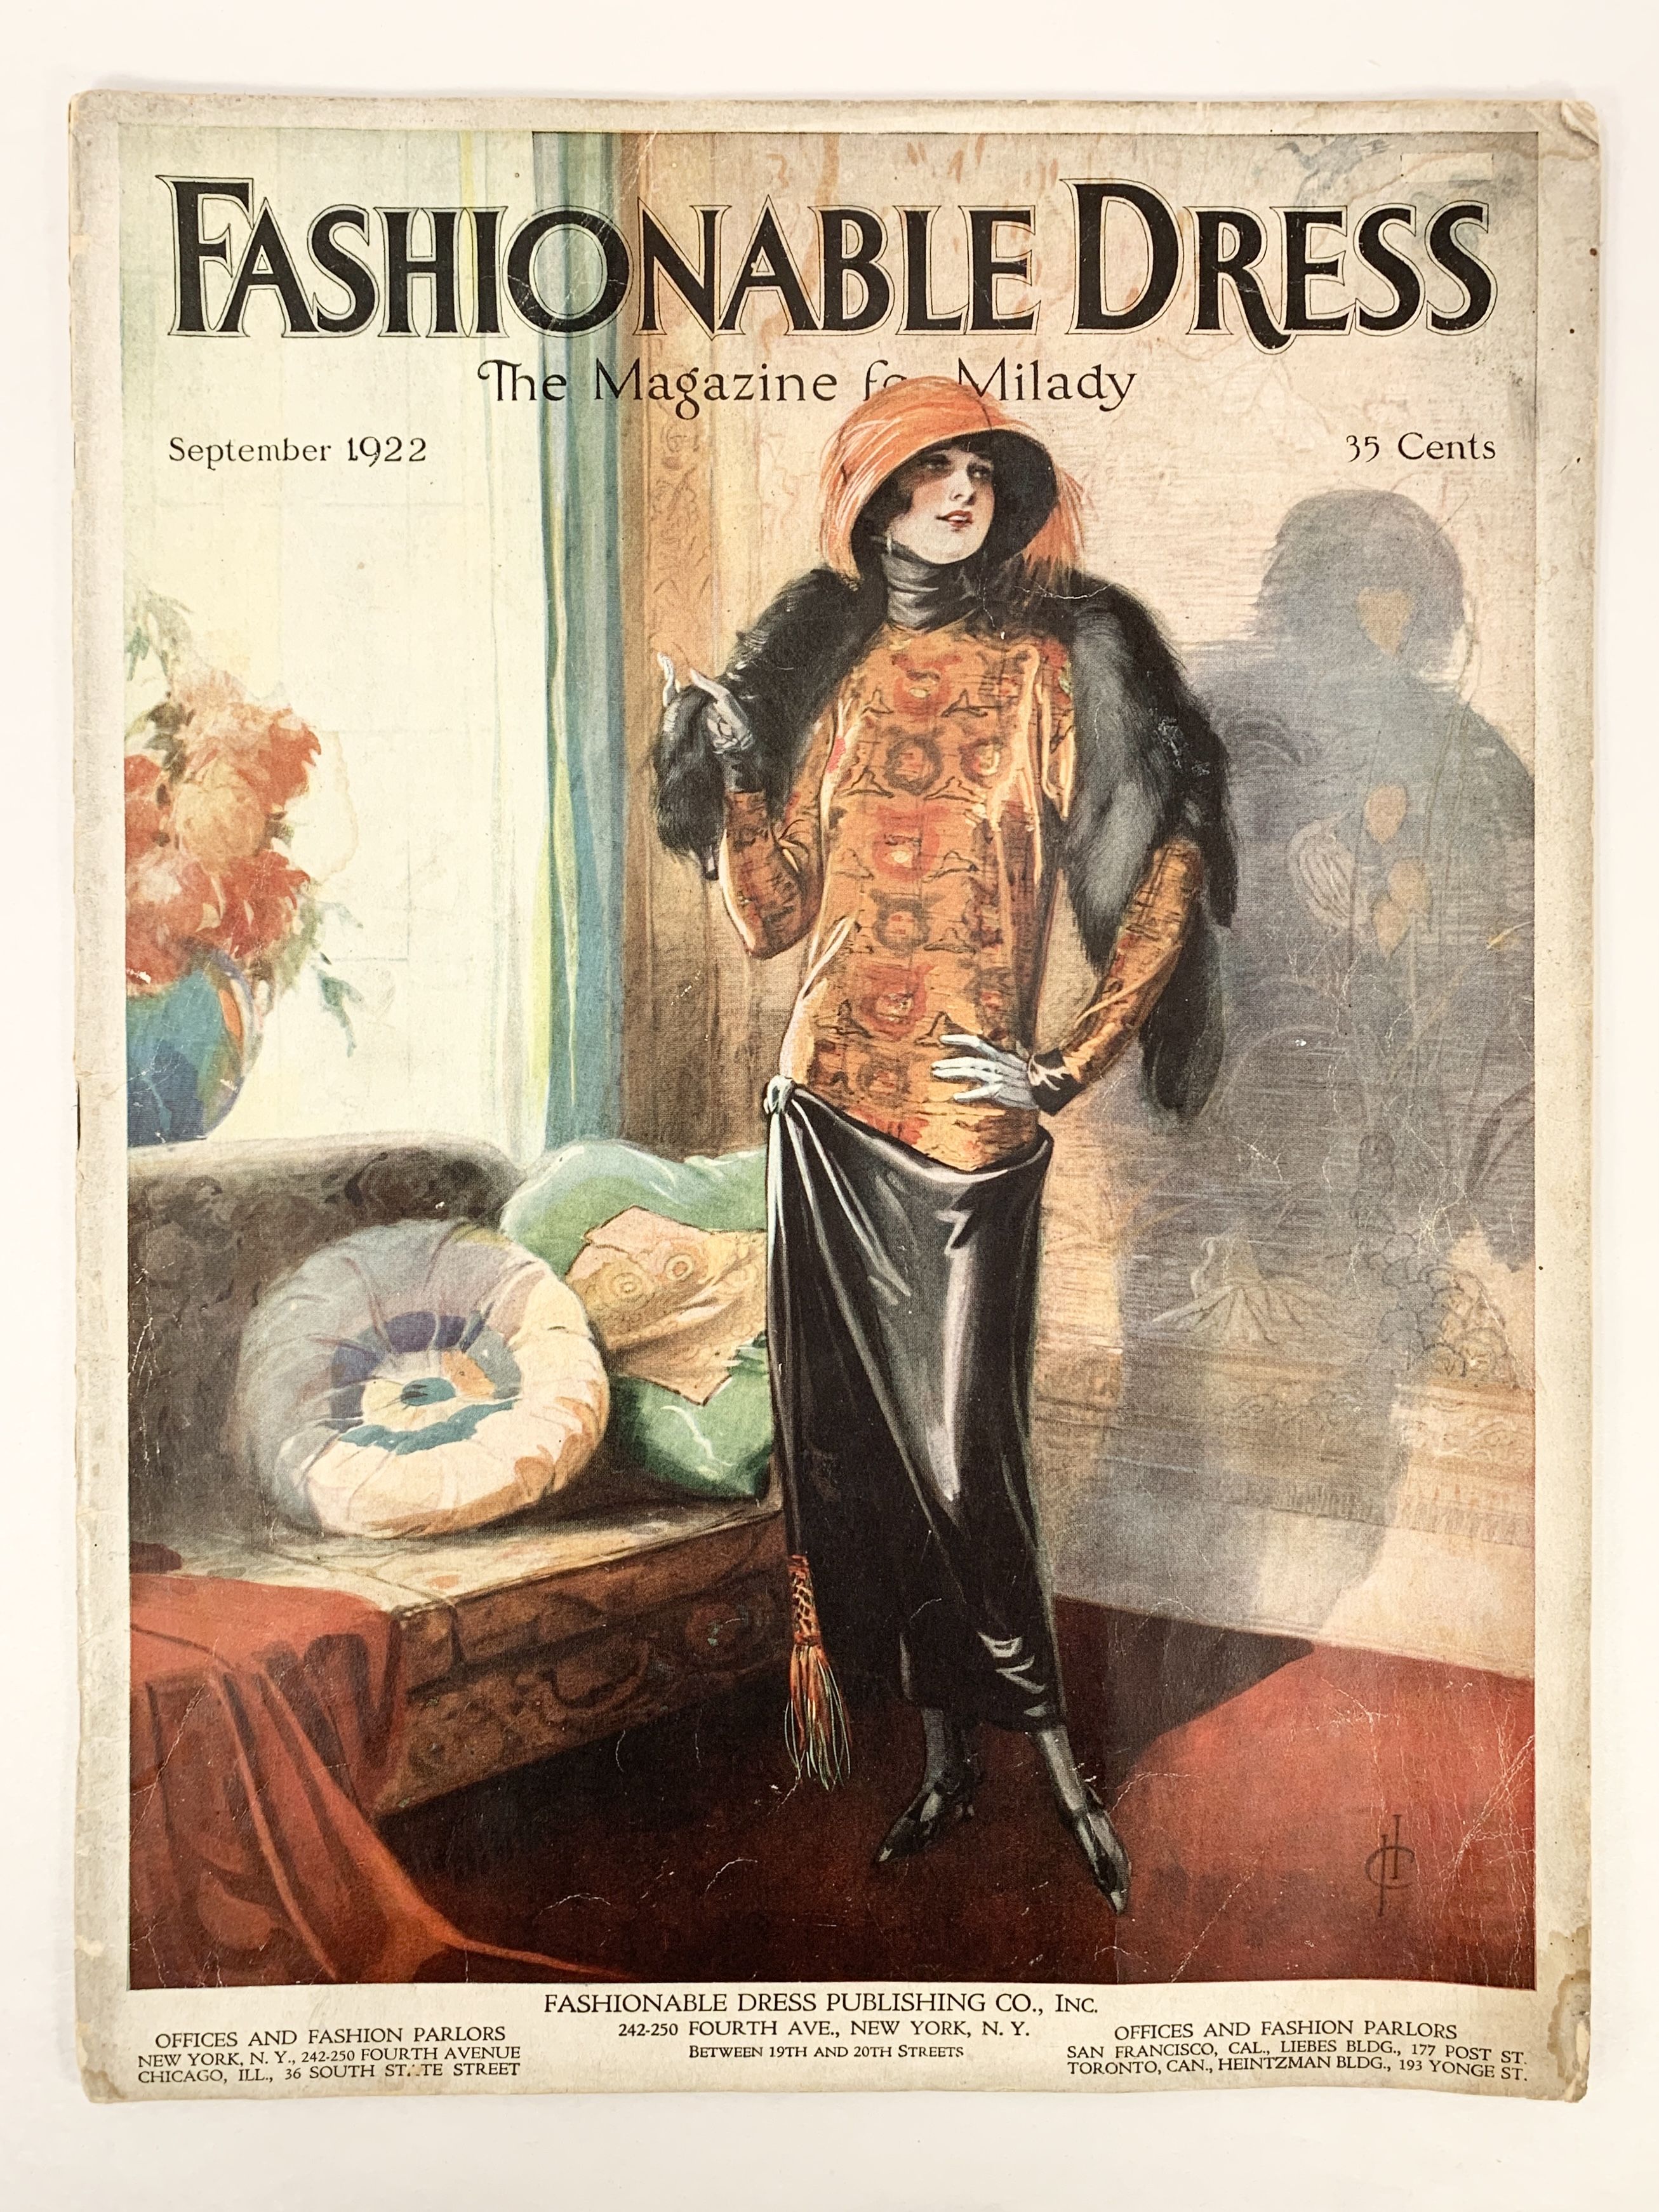 Fashionable Dress The Magazine for Milady September 1922: Very good  Original wraps (1922) First Edition.